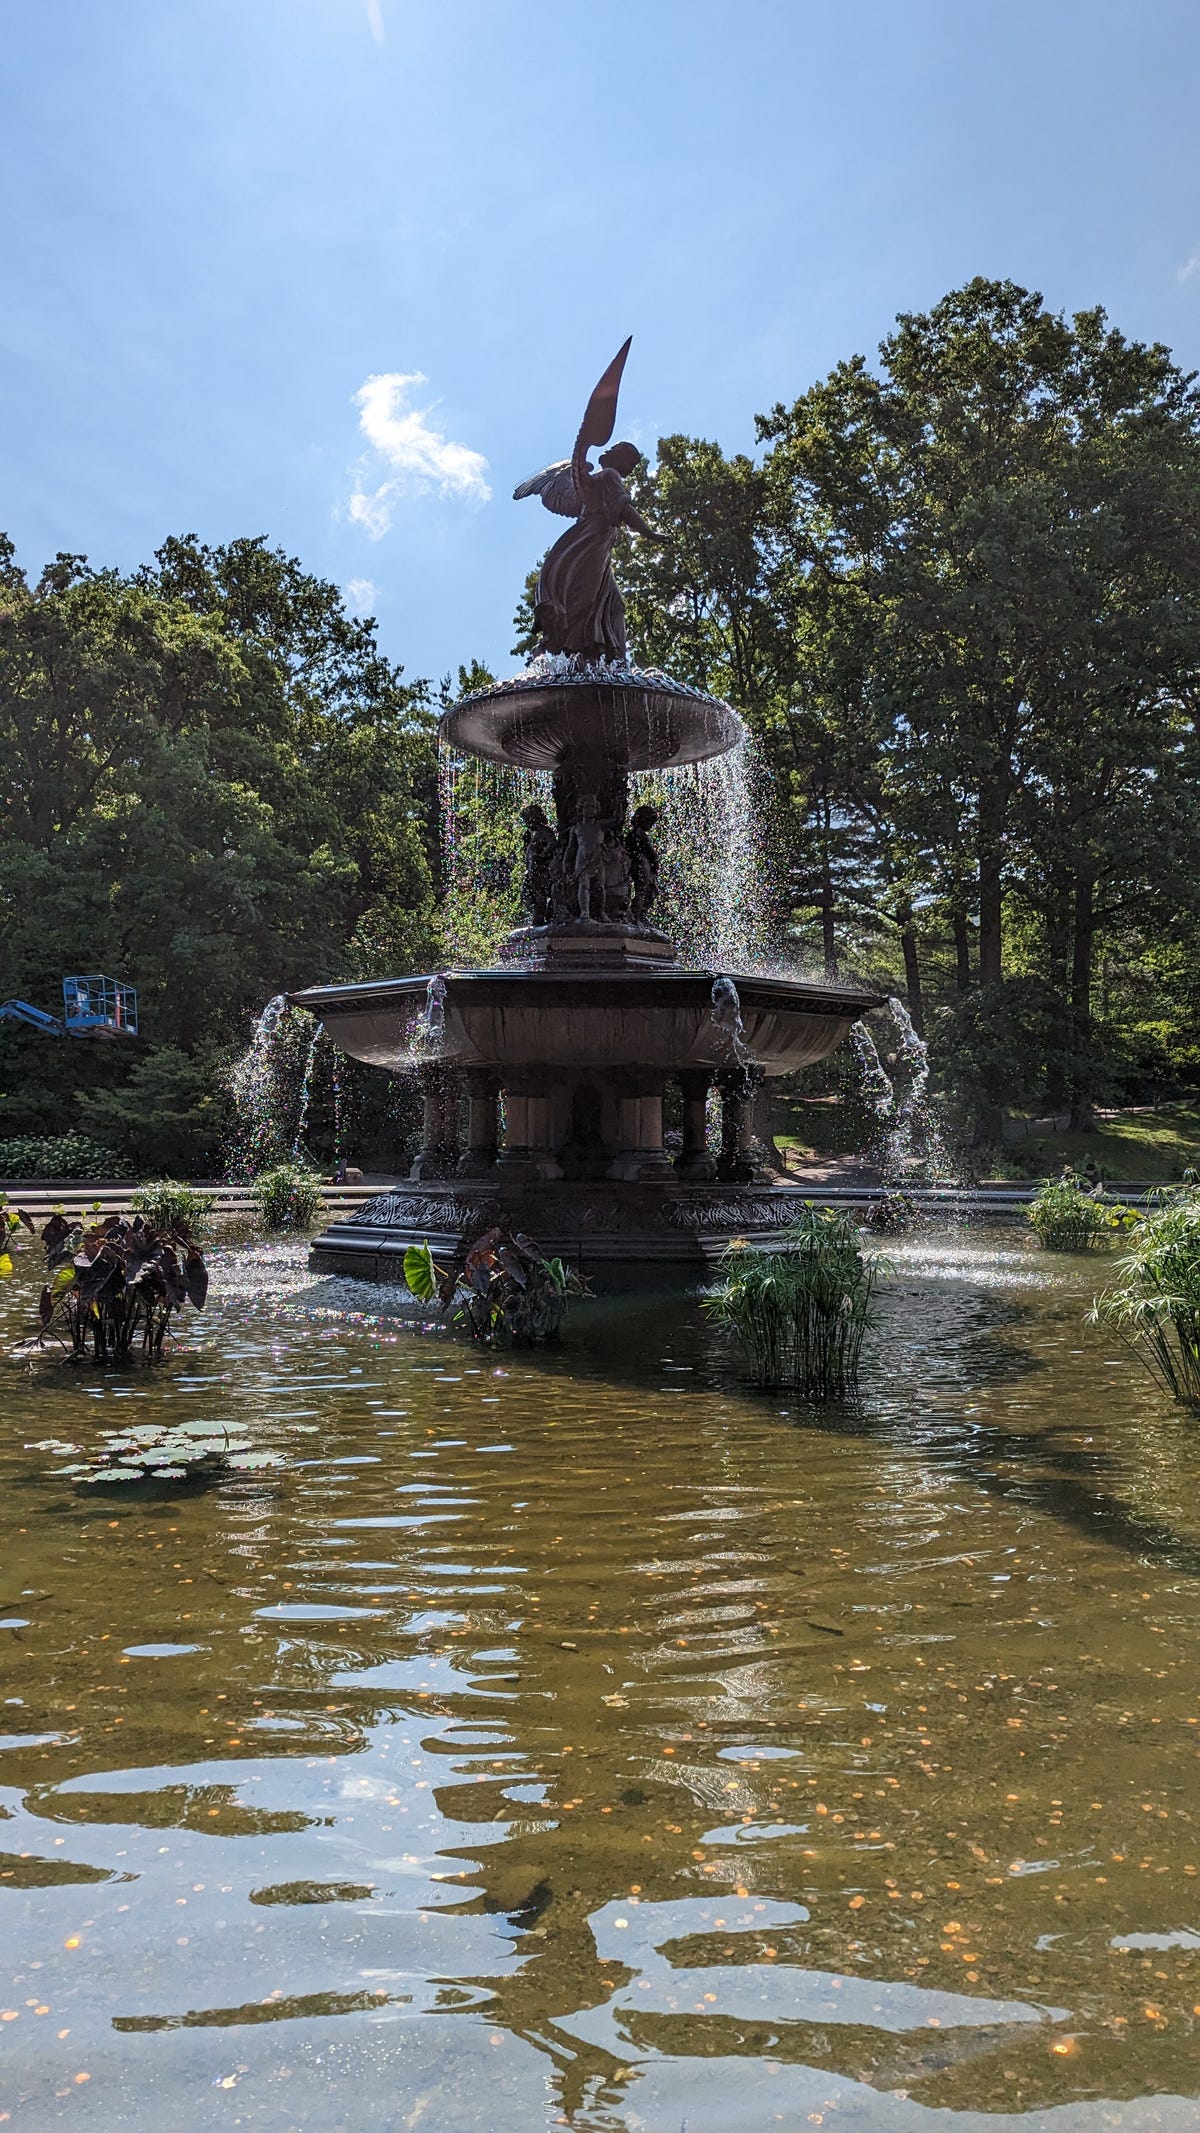 A photo of a fountain in Central Park taken on the Pixel 7 Pro